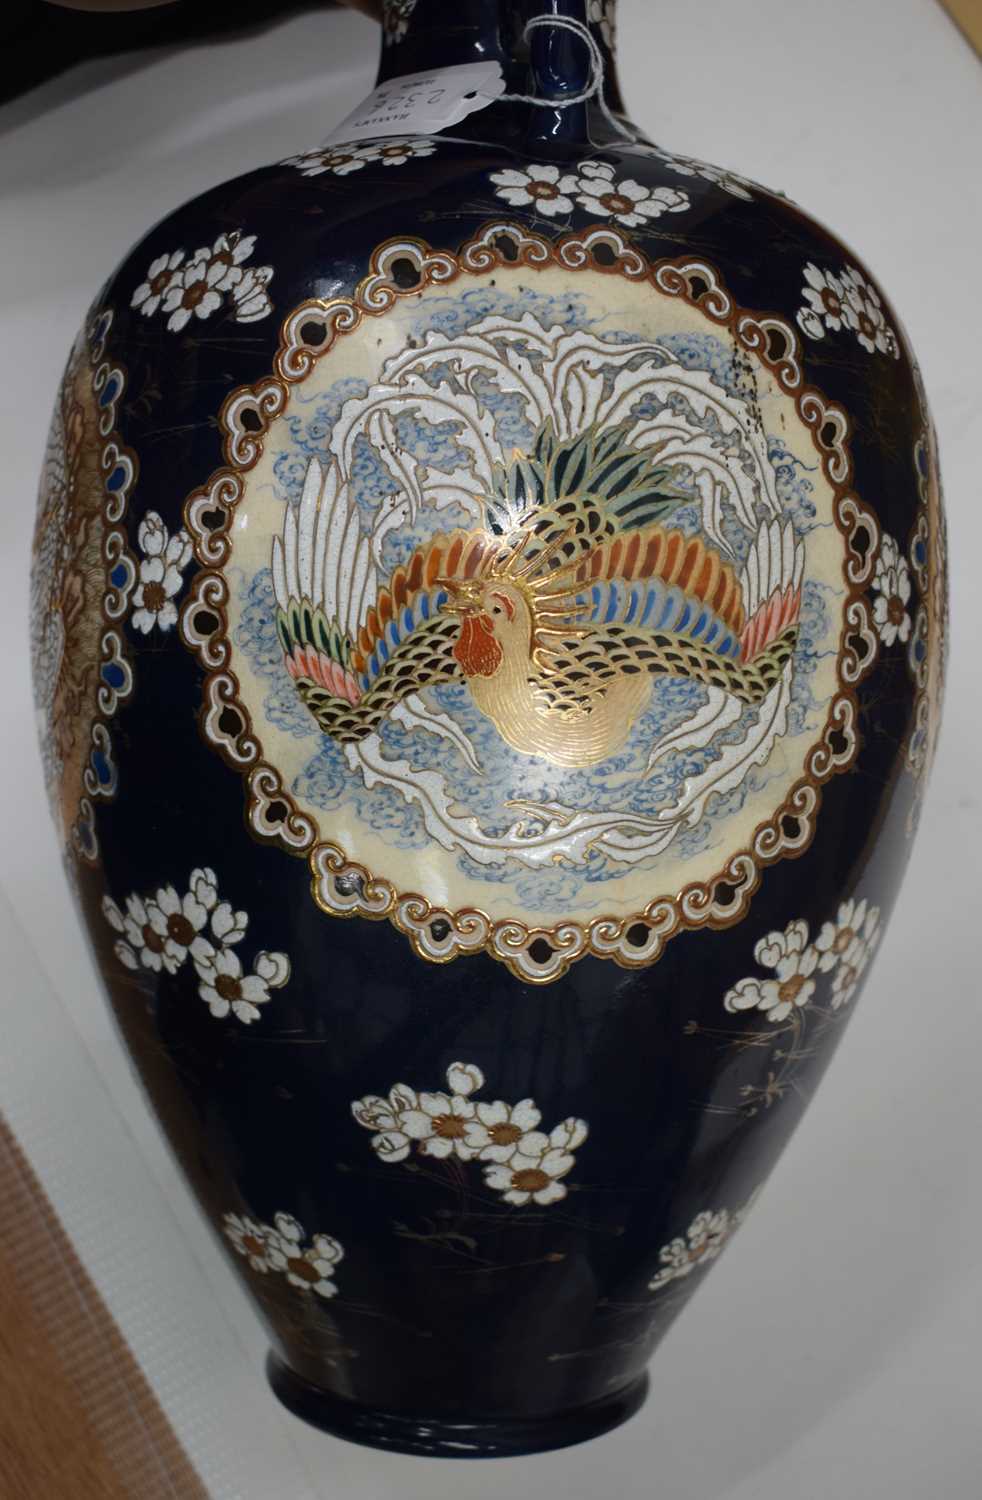 A LARGE PAIR OF LATE 19TH CENTURY JAPANESE MEIJI PERIOD SATSUMA VASES painted in relief with - Image 21 of 21